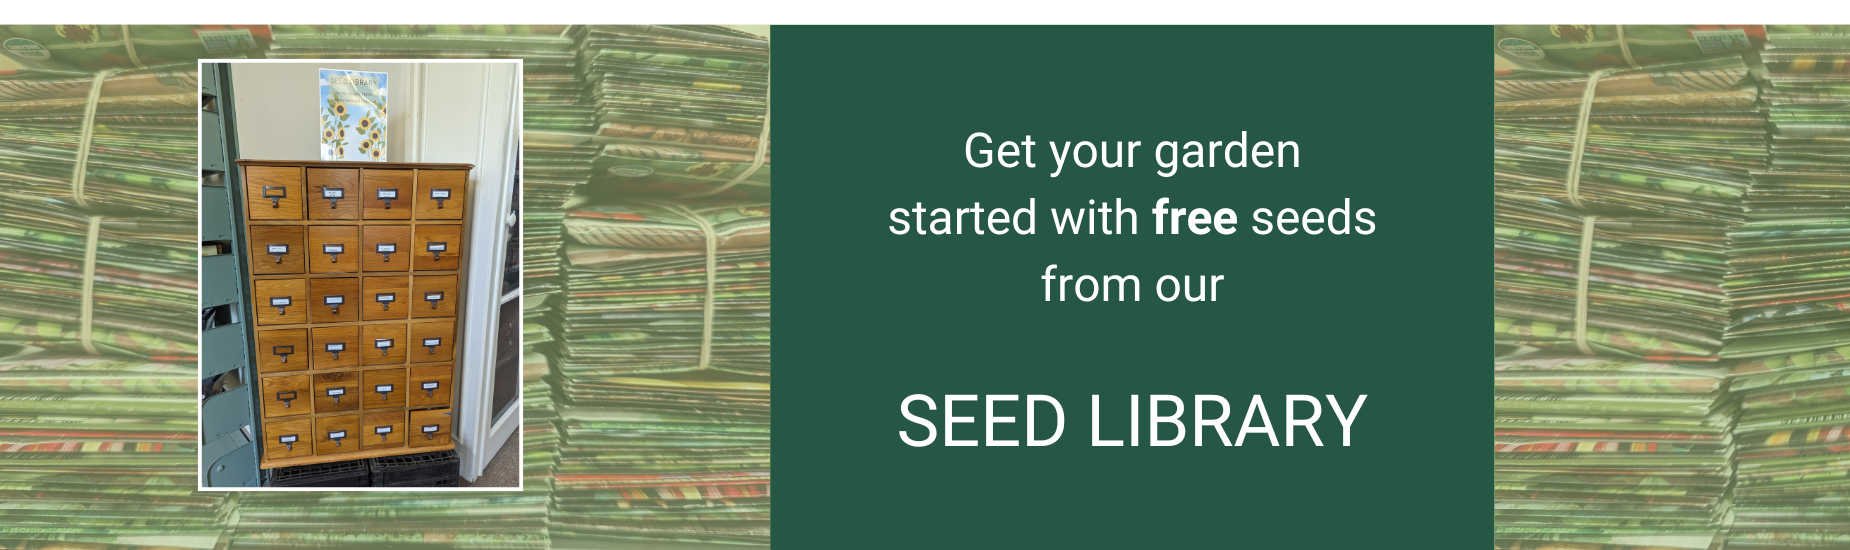 Free garden seeds at the library